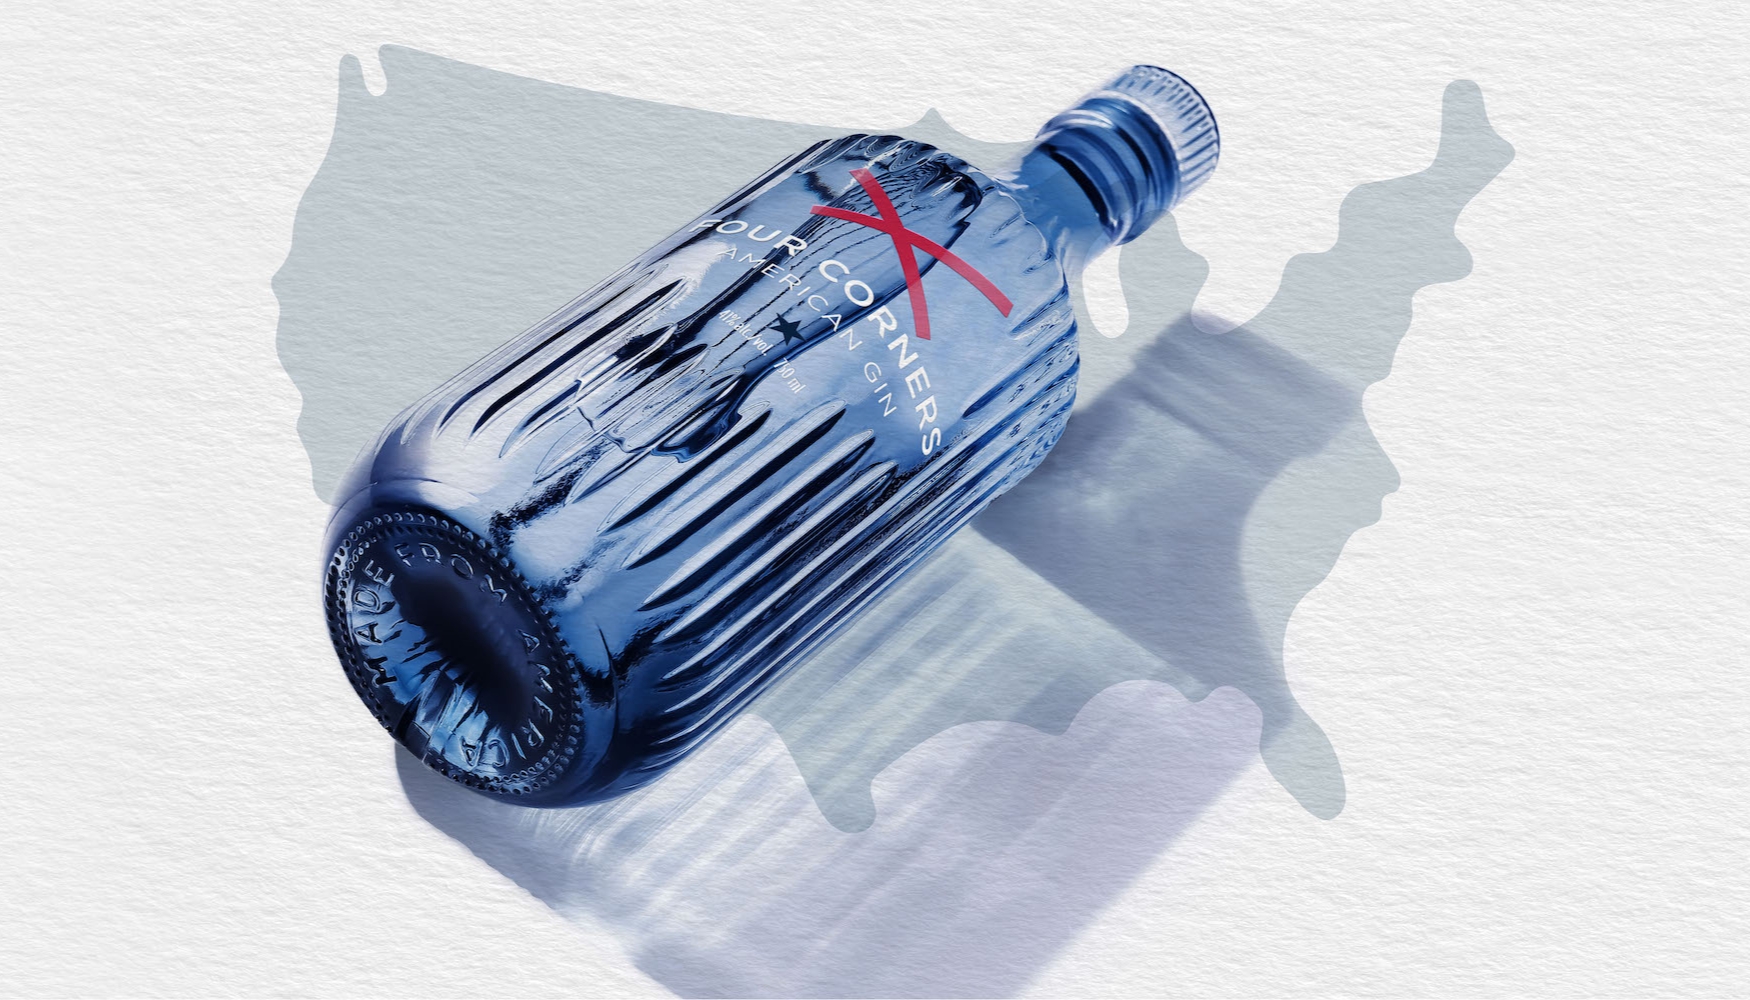 Promotional image of Four Corners American Gin bottle